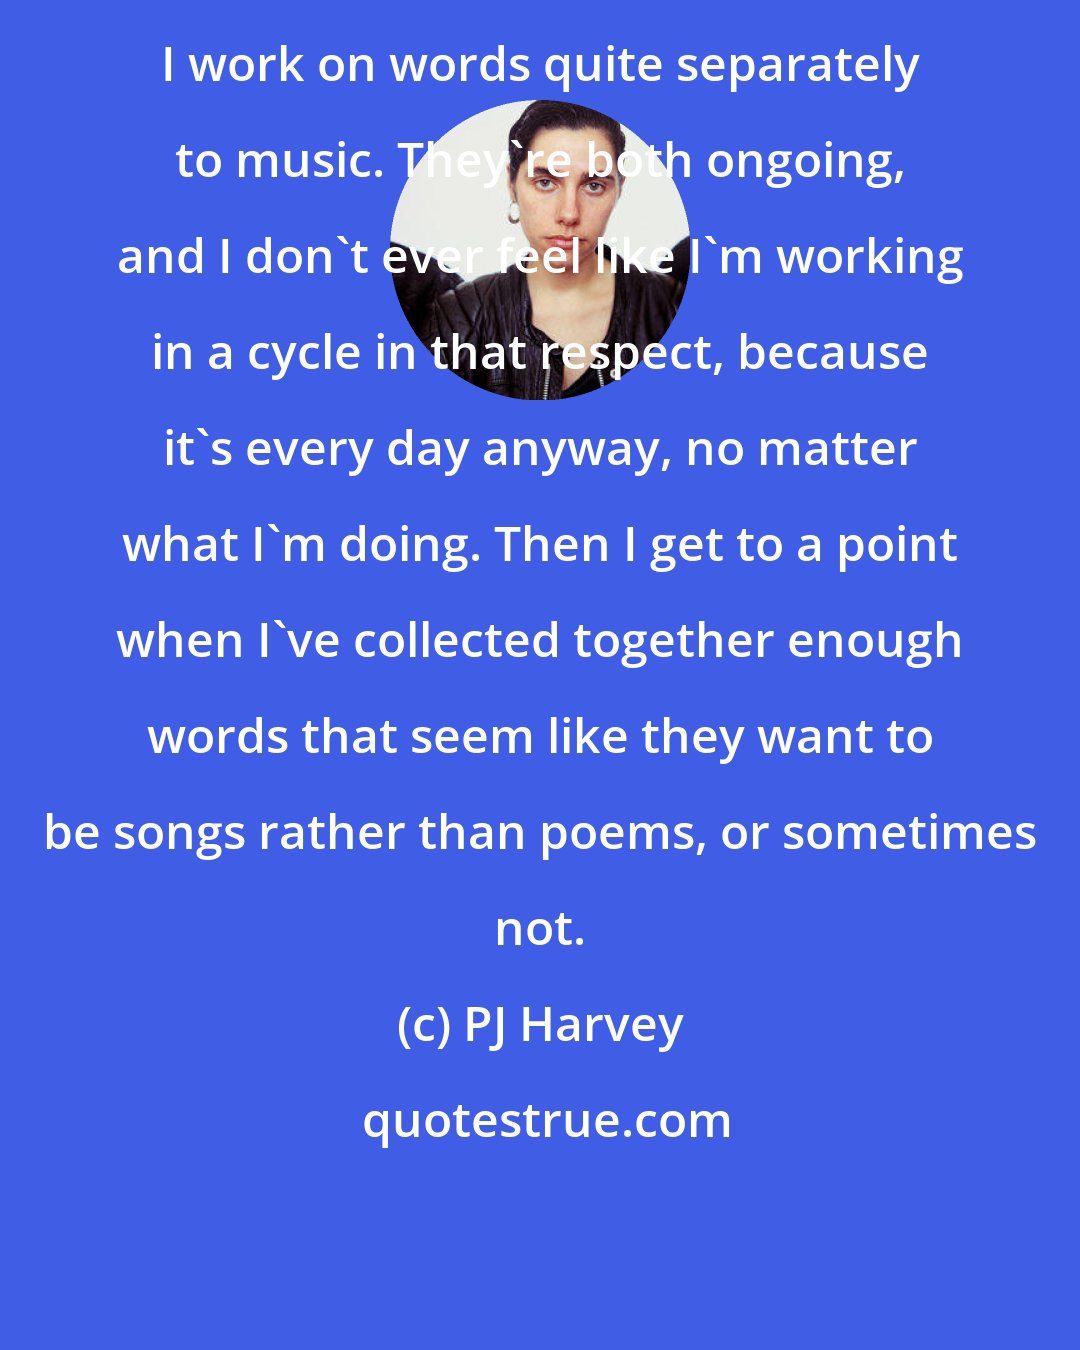 PJ Harvey: I work on words quite separately to music. They're both ongoing, and I don't ever feel like I'm working in a cycle in that respect, because it's every day anyway, no matter what I'm doing. Then I get to a point when I've collected together enough words that seem like they want to be songs rather than poems, or sometimes not.